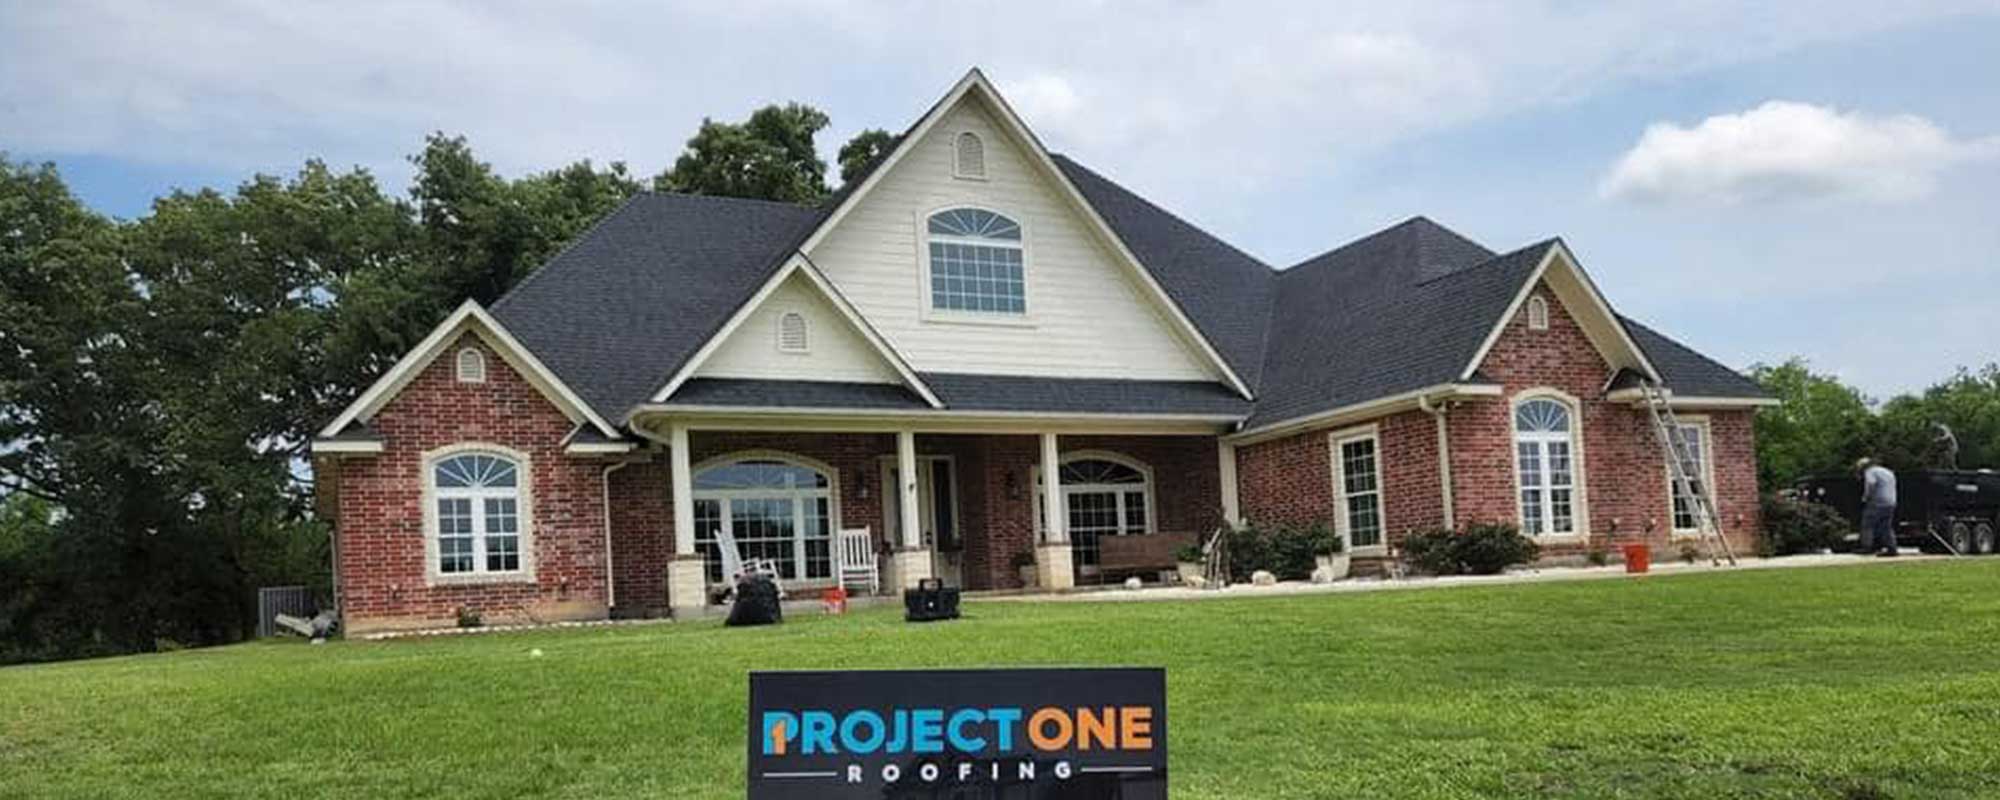 Project One®Roofing Trusted Roofing Contractors